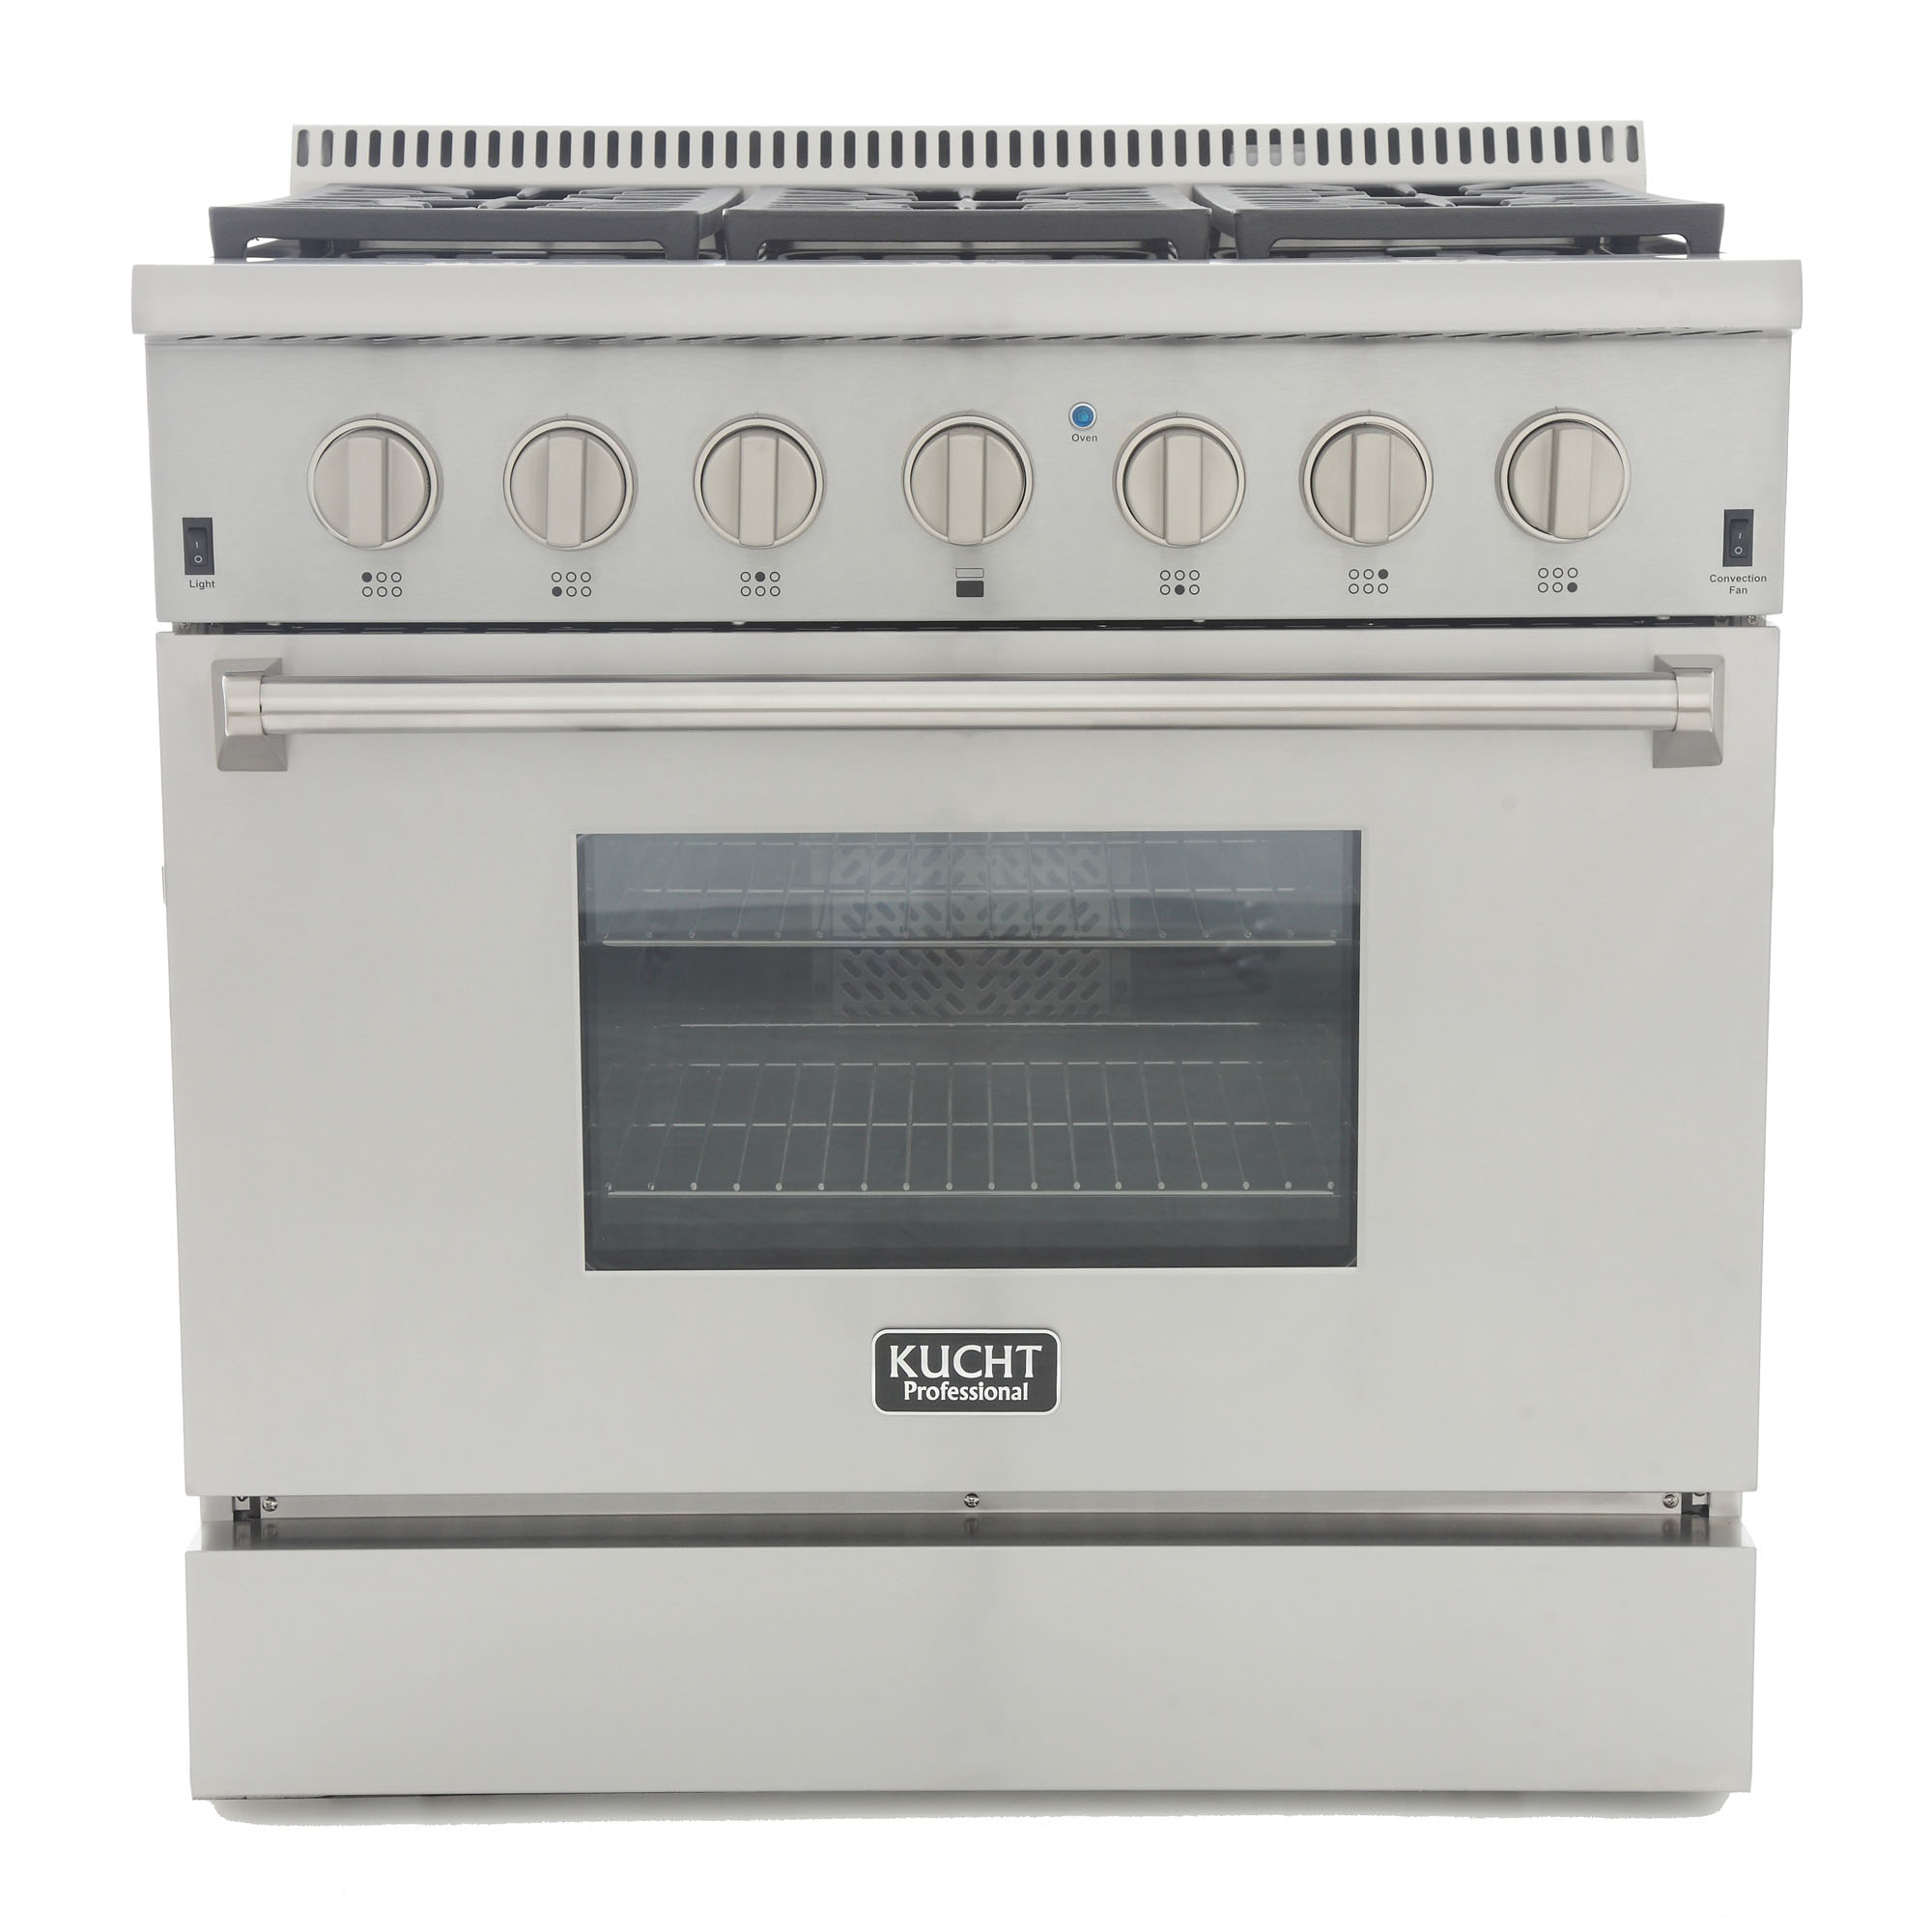 KUCHT Professional 36 in. 5.2 cu. ft. Dual Fuel Range for Propane Gas with Classic Silver Knobs